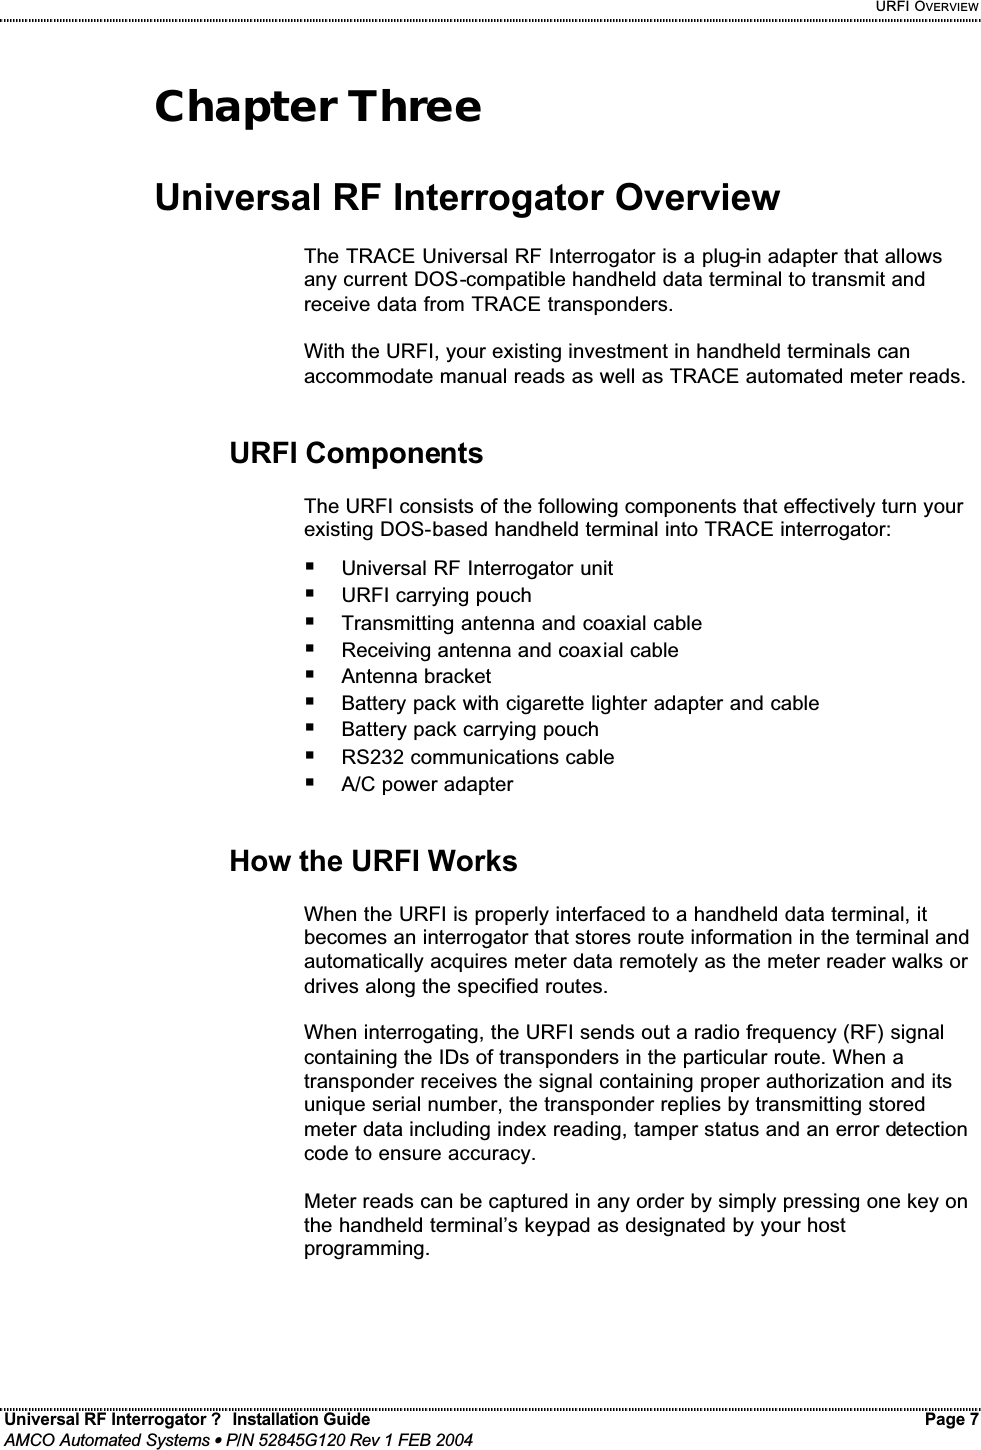     URFI OVERVIEW Universal RF Interrogator ?  Installation Guide    Page 7  AMCO Automated Systems • P/N 52845G120 Rev 1 FEB 2004                                                                                                                                 Chapter Three  Universal RF Interrogator Overview  The TRACE Universal RF Interrogator is a plug-in adapter that allows any current DOS-compatible handheld data terminal to transmit and receive data from TRACE transponders.   With the URFI, your existing investment in handheld terminals can accommodate manual reads as well as TRACE automated meter reads.   URFI Components  The URFI consists of the following components that effectively turn your existing DOS-based handheld terminal into TRACE interrogator: ! Universal RF Interrogator unit ! URFI carrying pouch ! Transmitting antenna and coaxial cable ! Receiving antenna and coaxial cable ! Antenna bracket ! Battery pack with cigarette lighter adapter and cable ! Battery pack carrying pouch ! RS232 communications cable ! A/C power adapter   How the URFI Works  When the URFI is properly interfaced to a handheld data terminal, it becomes an interrogator that stores route information in the terminal and automatically acquires meter data remotely as the meter reader walks or drives along the specified routes.   When interrogating, the URFI sends out a radio frequency (RF) signal containing the IDs of transponders in the particular route. When a transponder receives the signal containing proper authorization and its unique serial number, the transponder replies by transmitting stored meter data including index reading, tamper status and an error detection code to ensure accuracy.  Meter reads can be captured in any order by simply pressing one key on the handheld terminal’s keypad as designated by your host programming.  